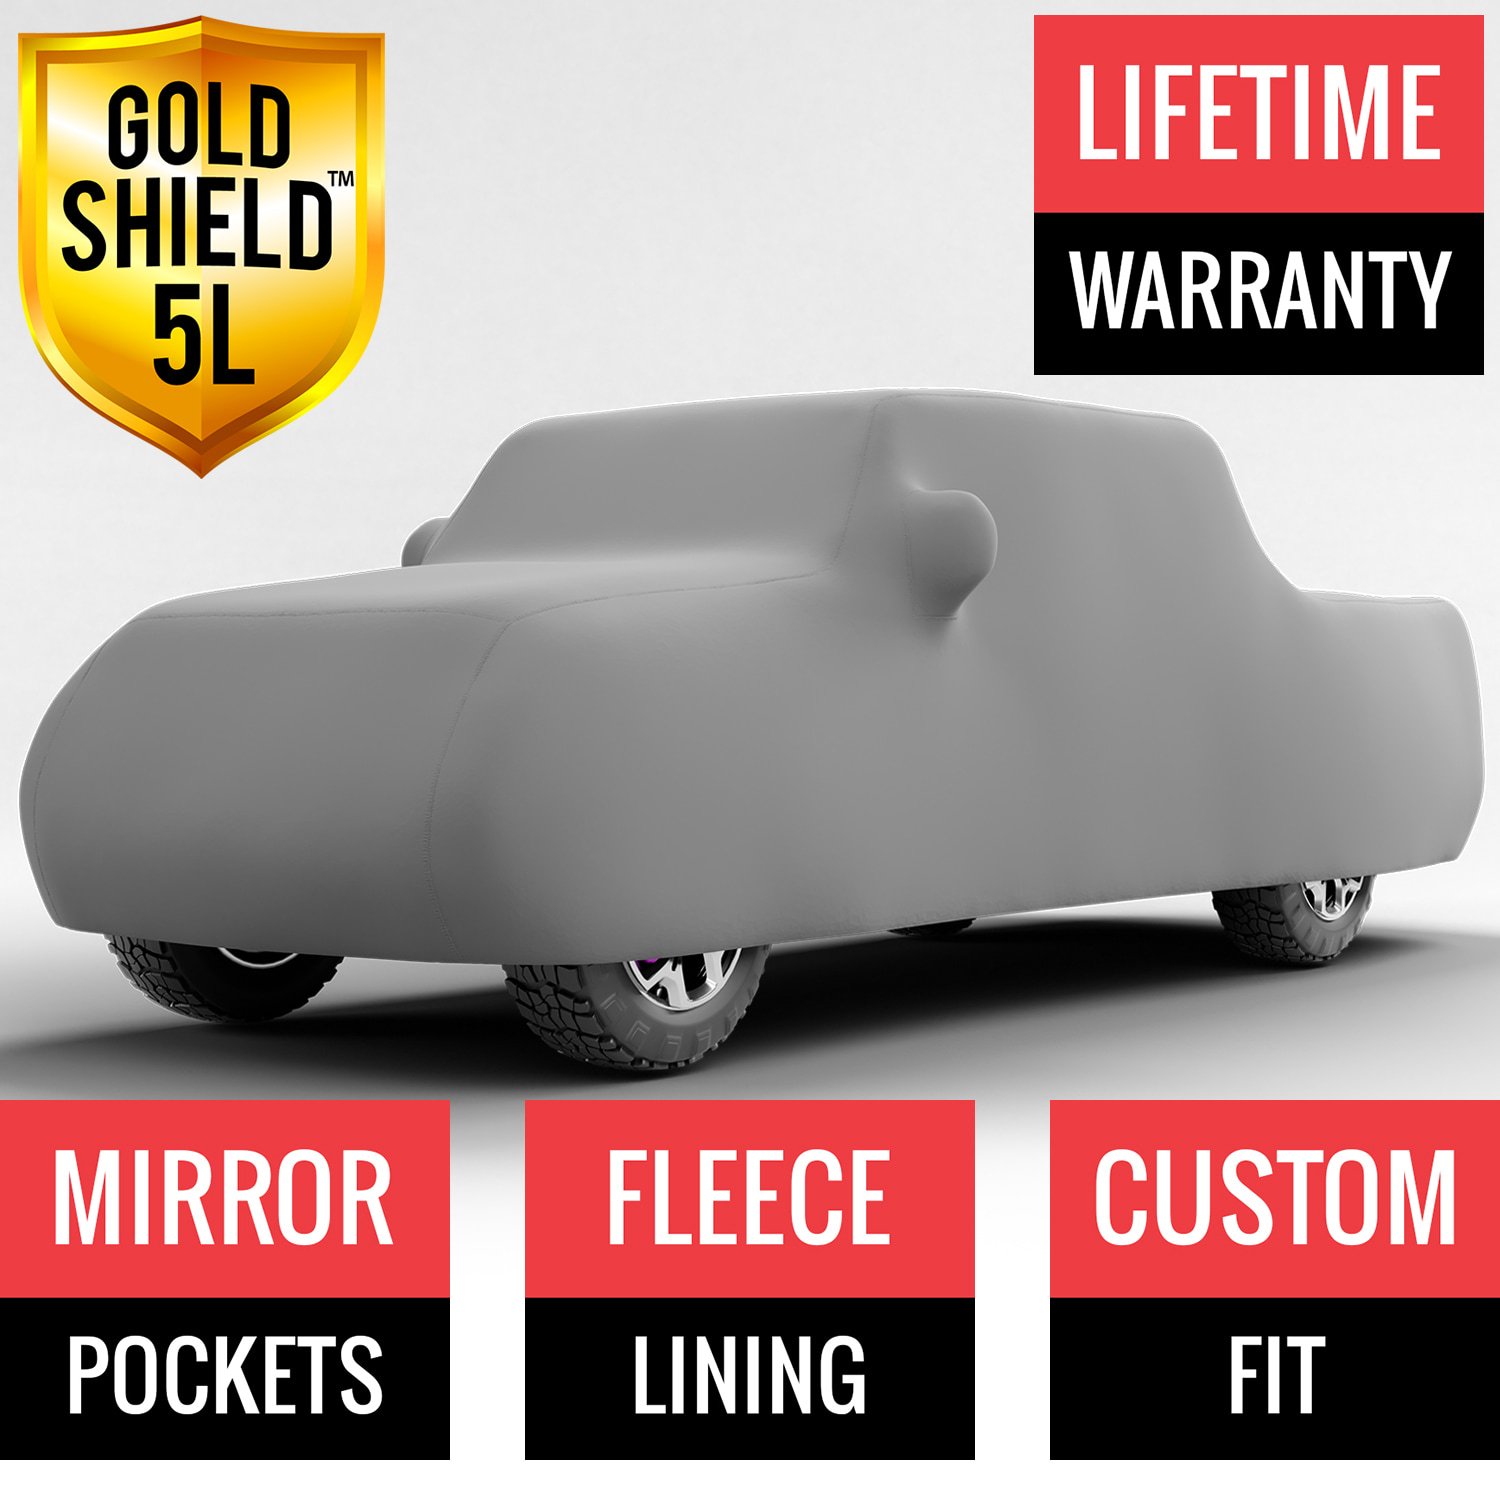 Gold Shield 5L - Car Cover for Jeep Gladiator 2020 Crew Cab Pickup 5.0 Feet Bed